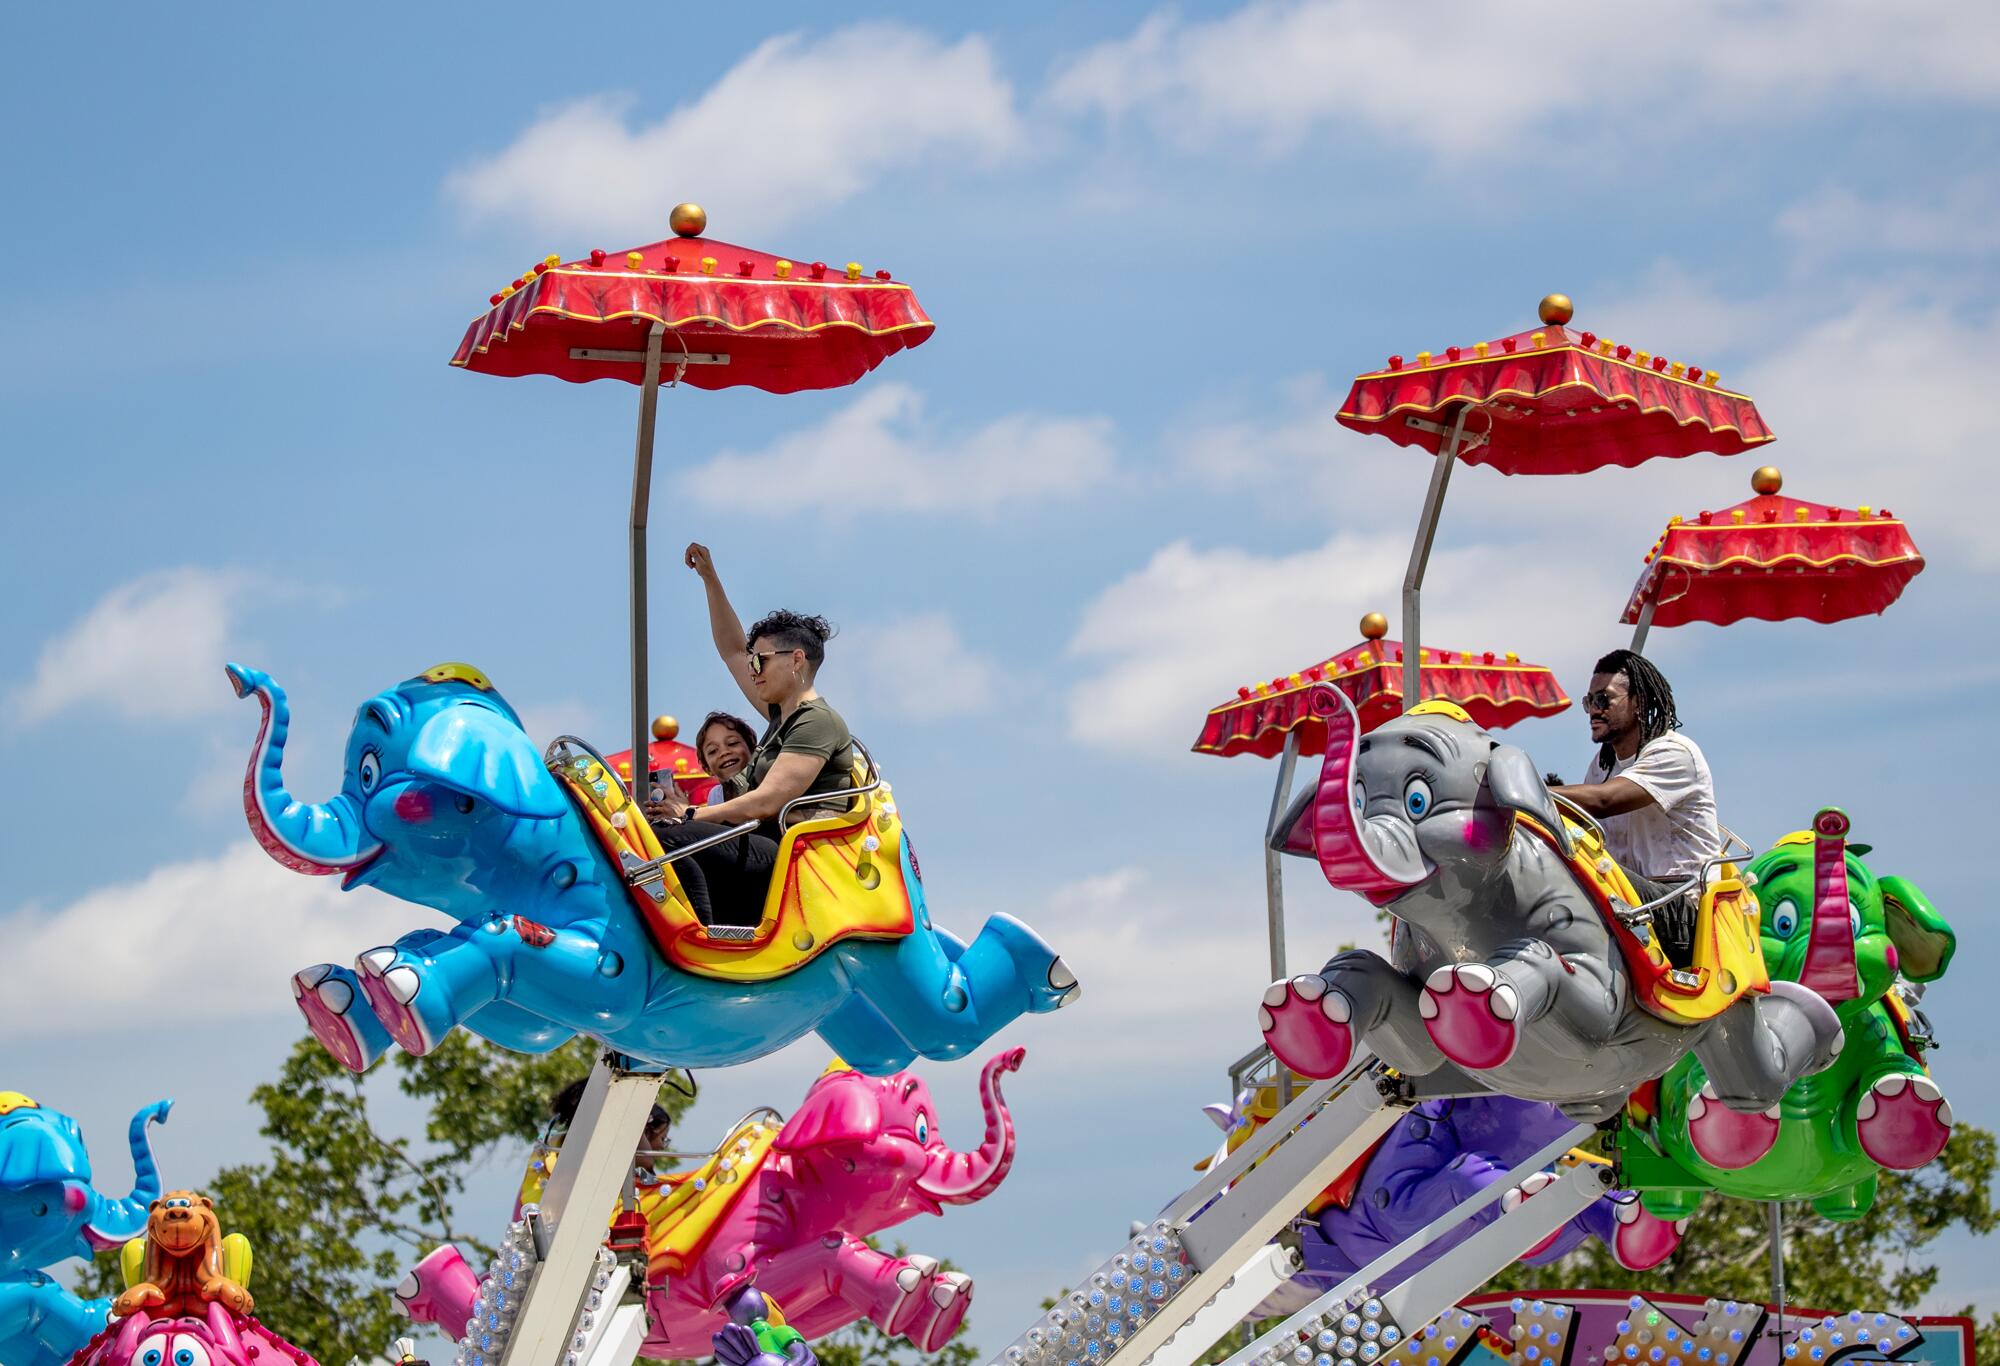 A low angle frame of people riding plastic elephants with umbrellas above them.